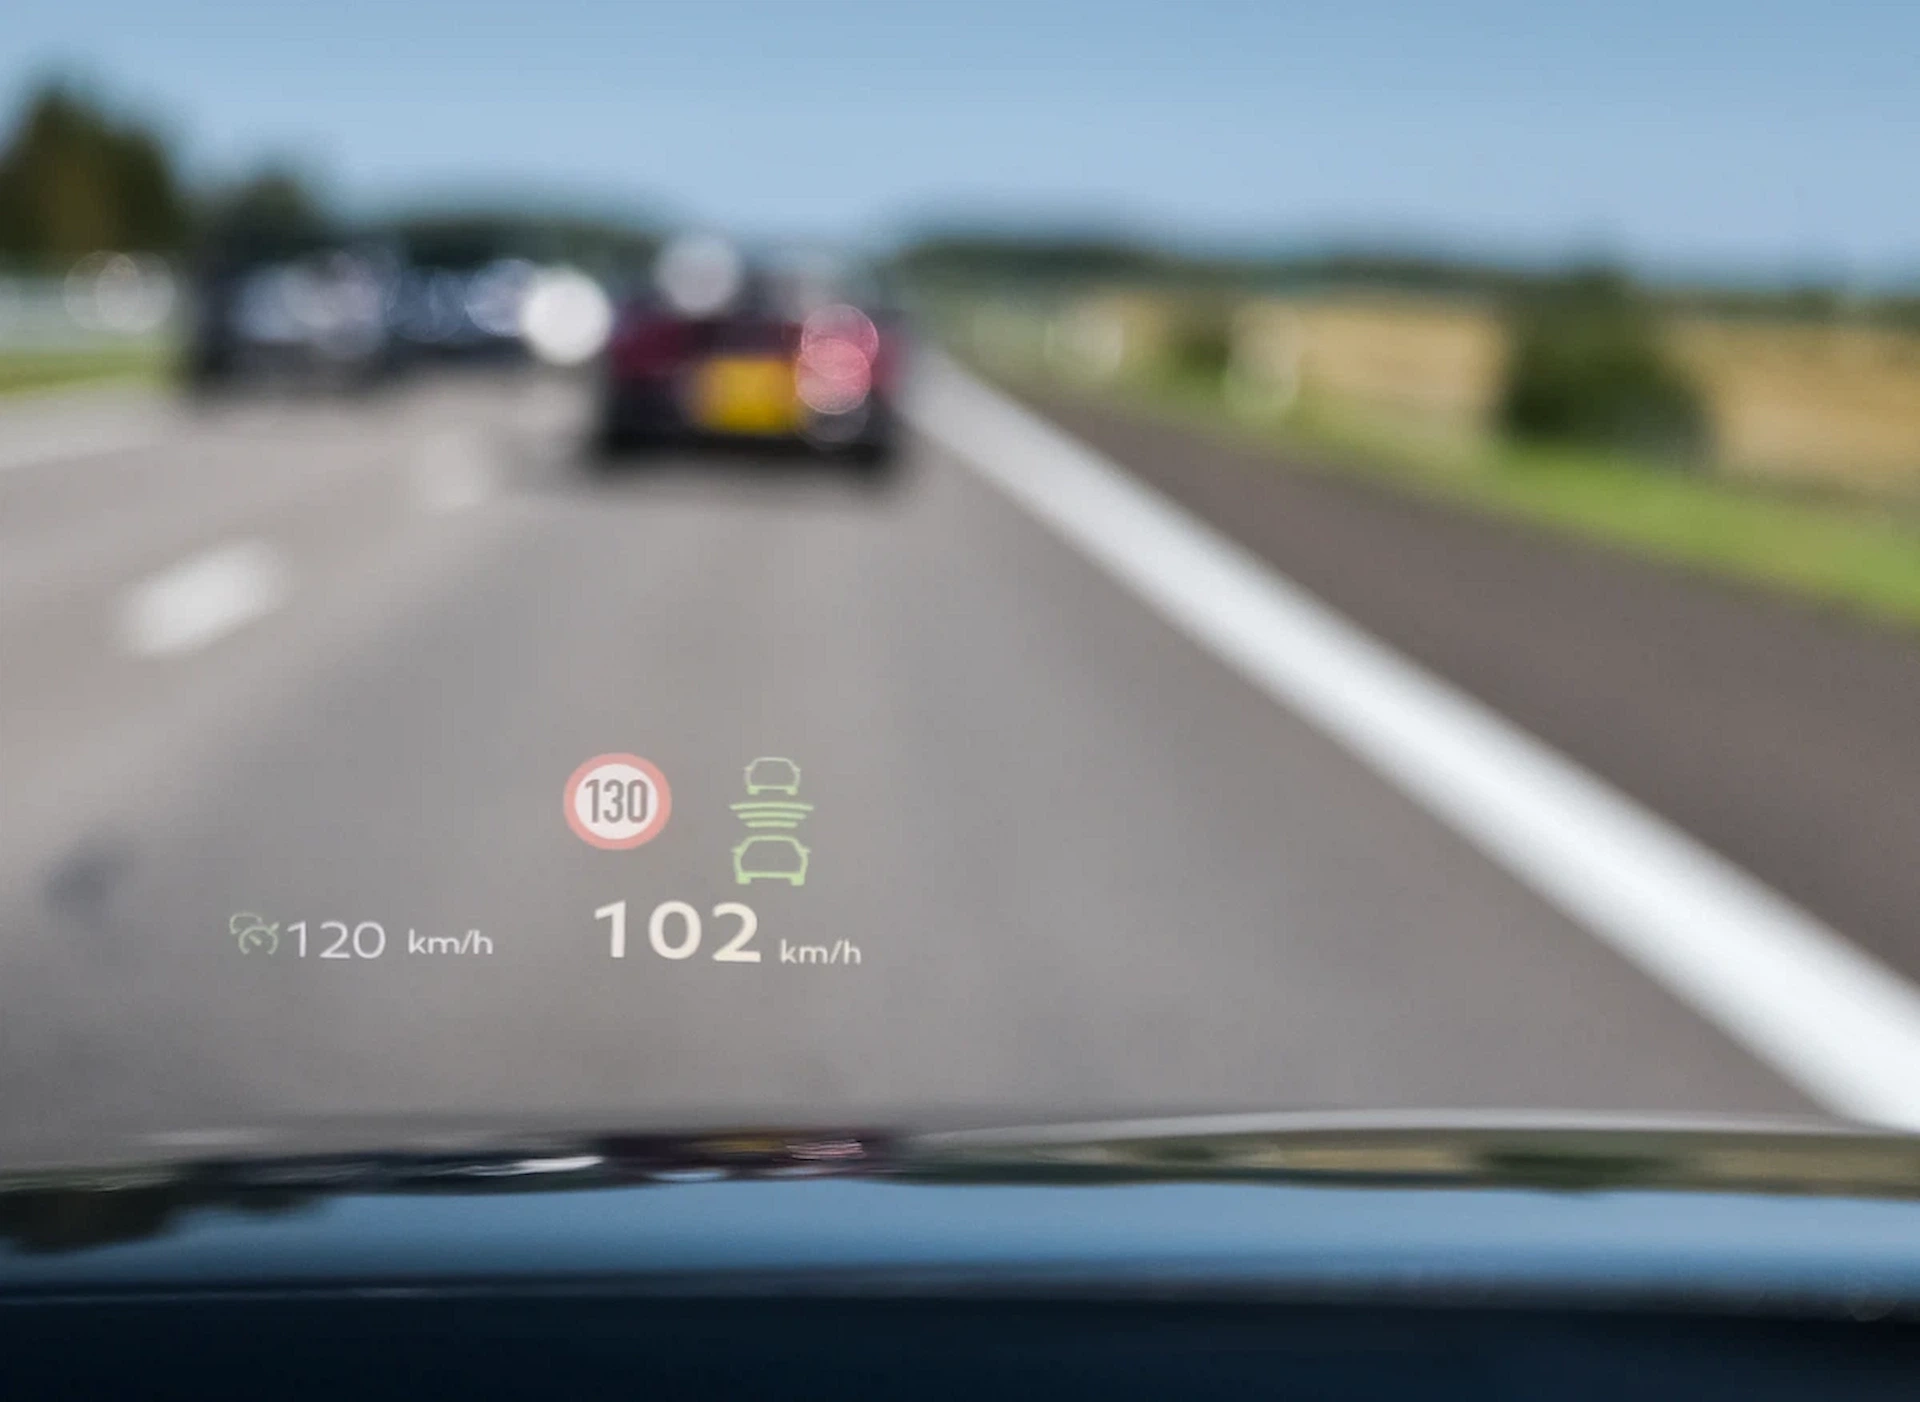 Driving information projected on the windshield by head-up display